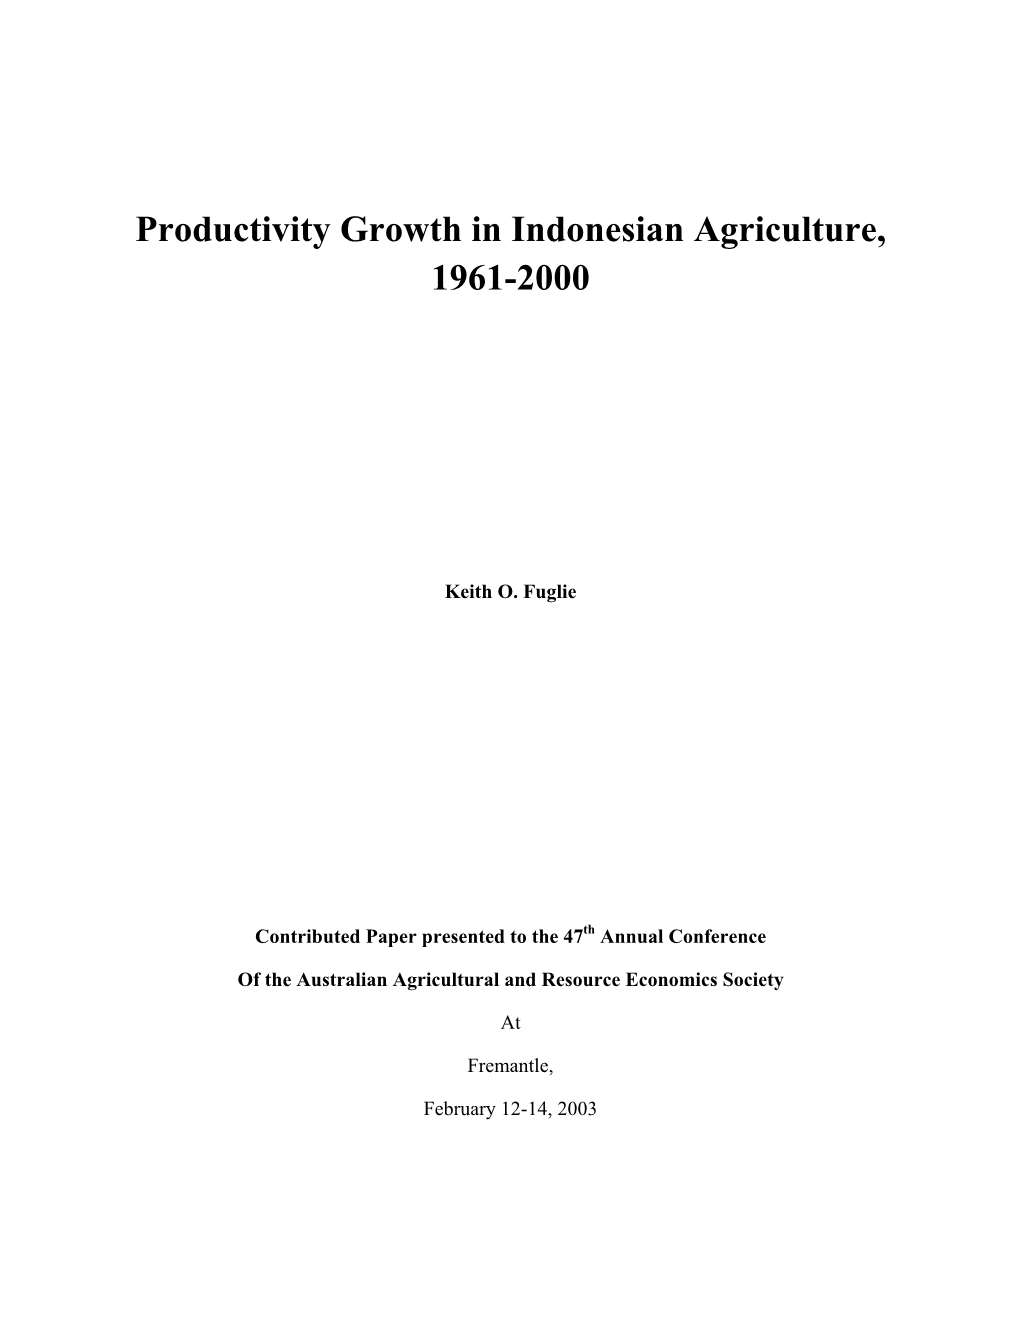 Productivity Growth in Indonesian Agriculture, 1961-2000